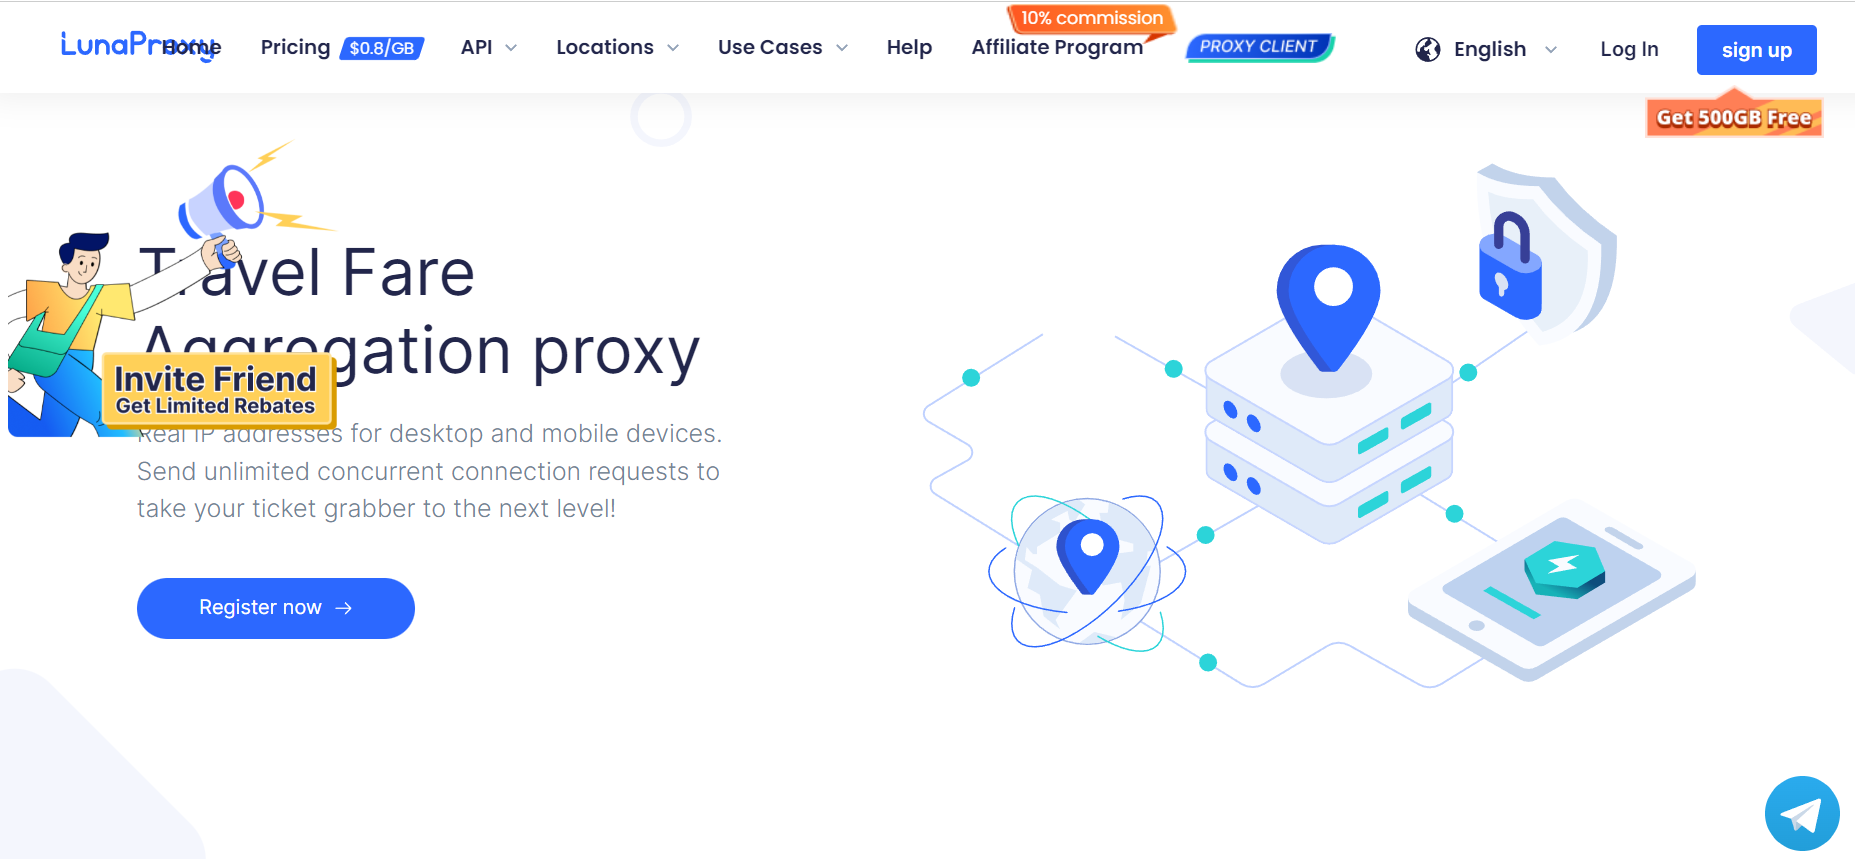 LunaProxy Travel Fare Aggregation Features